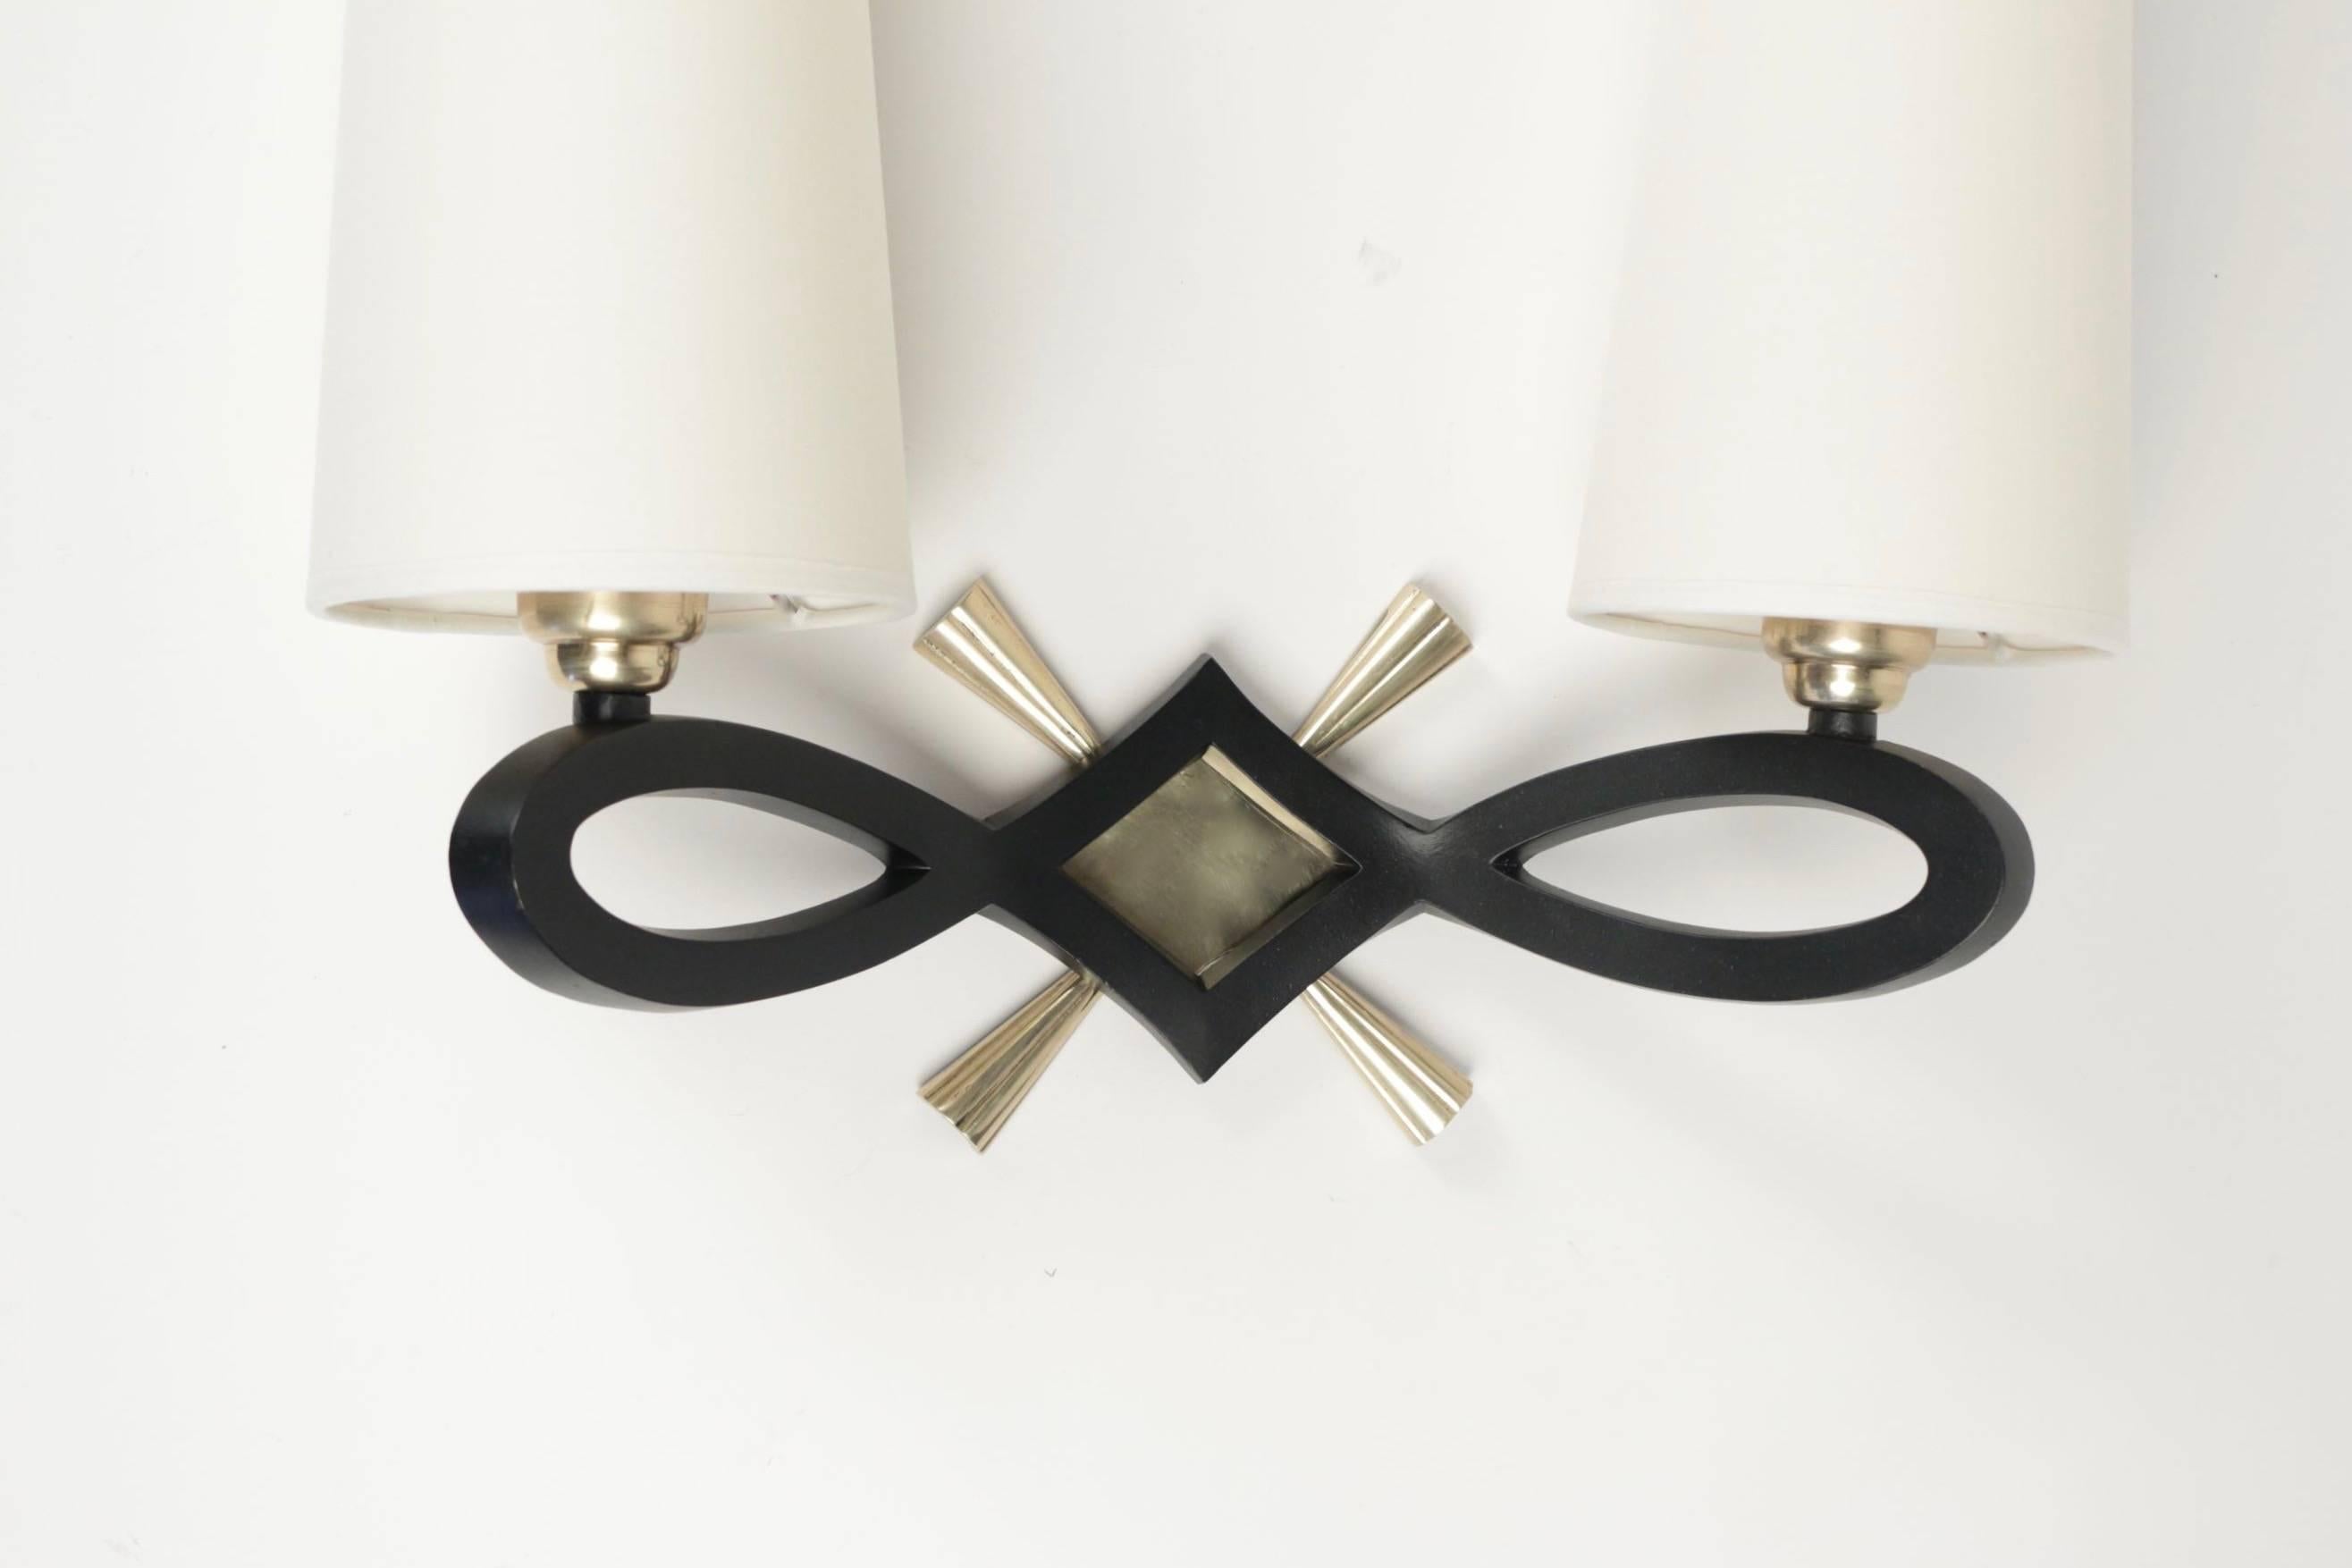 1940 pair of wall lights by Marcel Guillemard.

Each sconce consists in a large black lacquered bronze knot highlighted with a gilded bronze diamond-shaped plate and cross.

Two lighted arms and two white ivory cotton lampshades.

The signature is